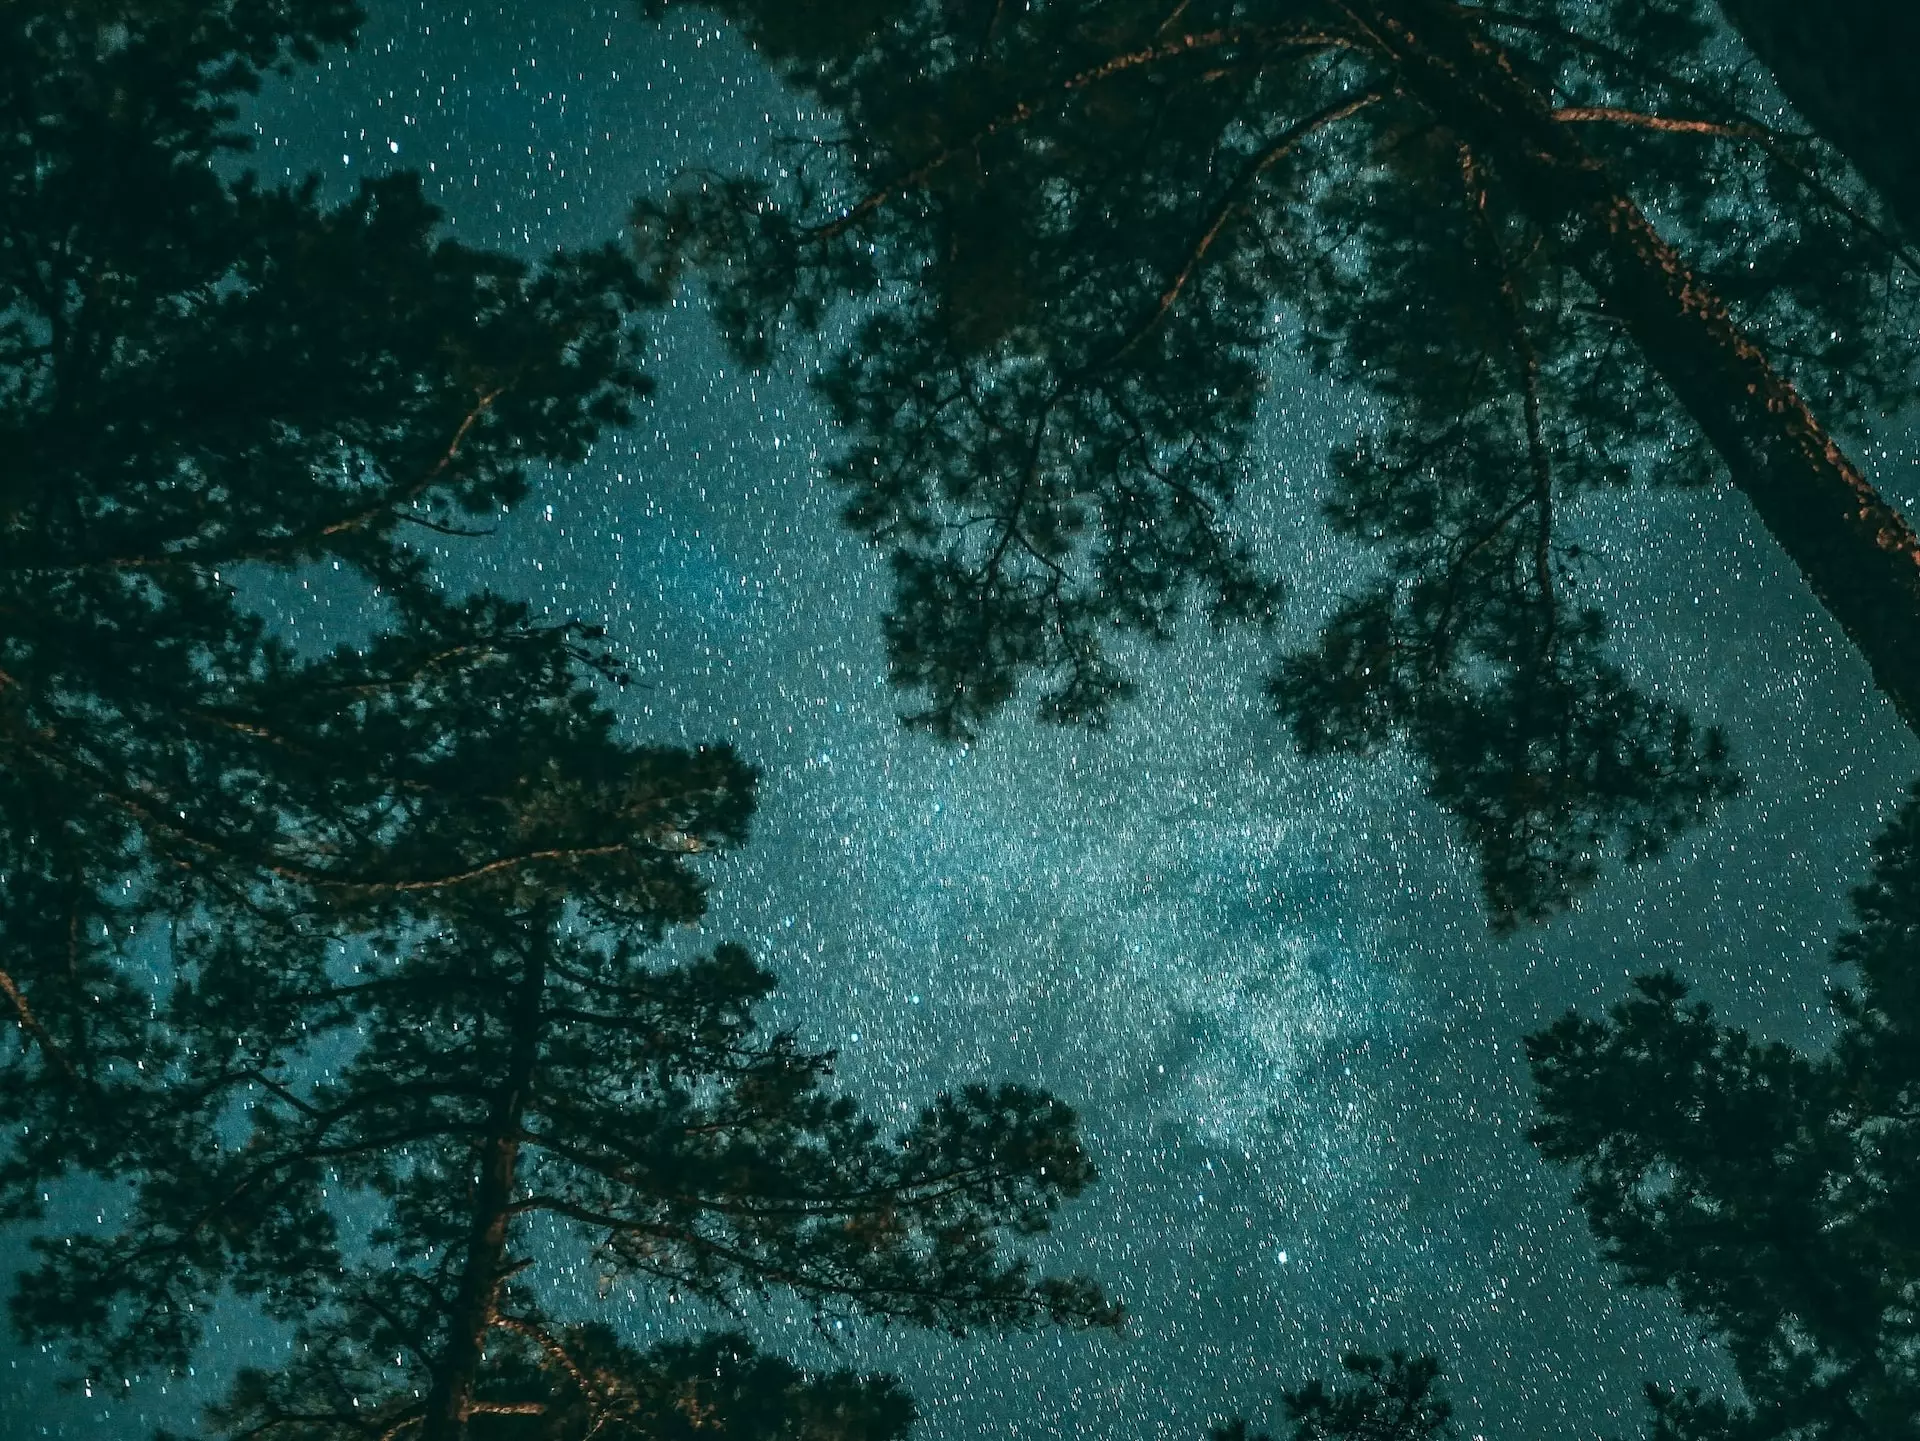 The night sky above a pine forest